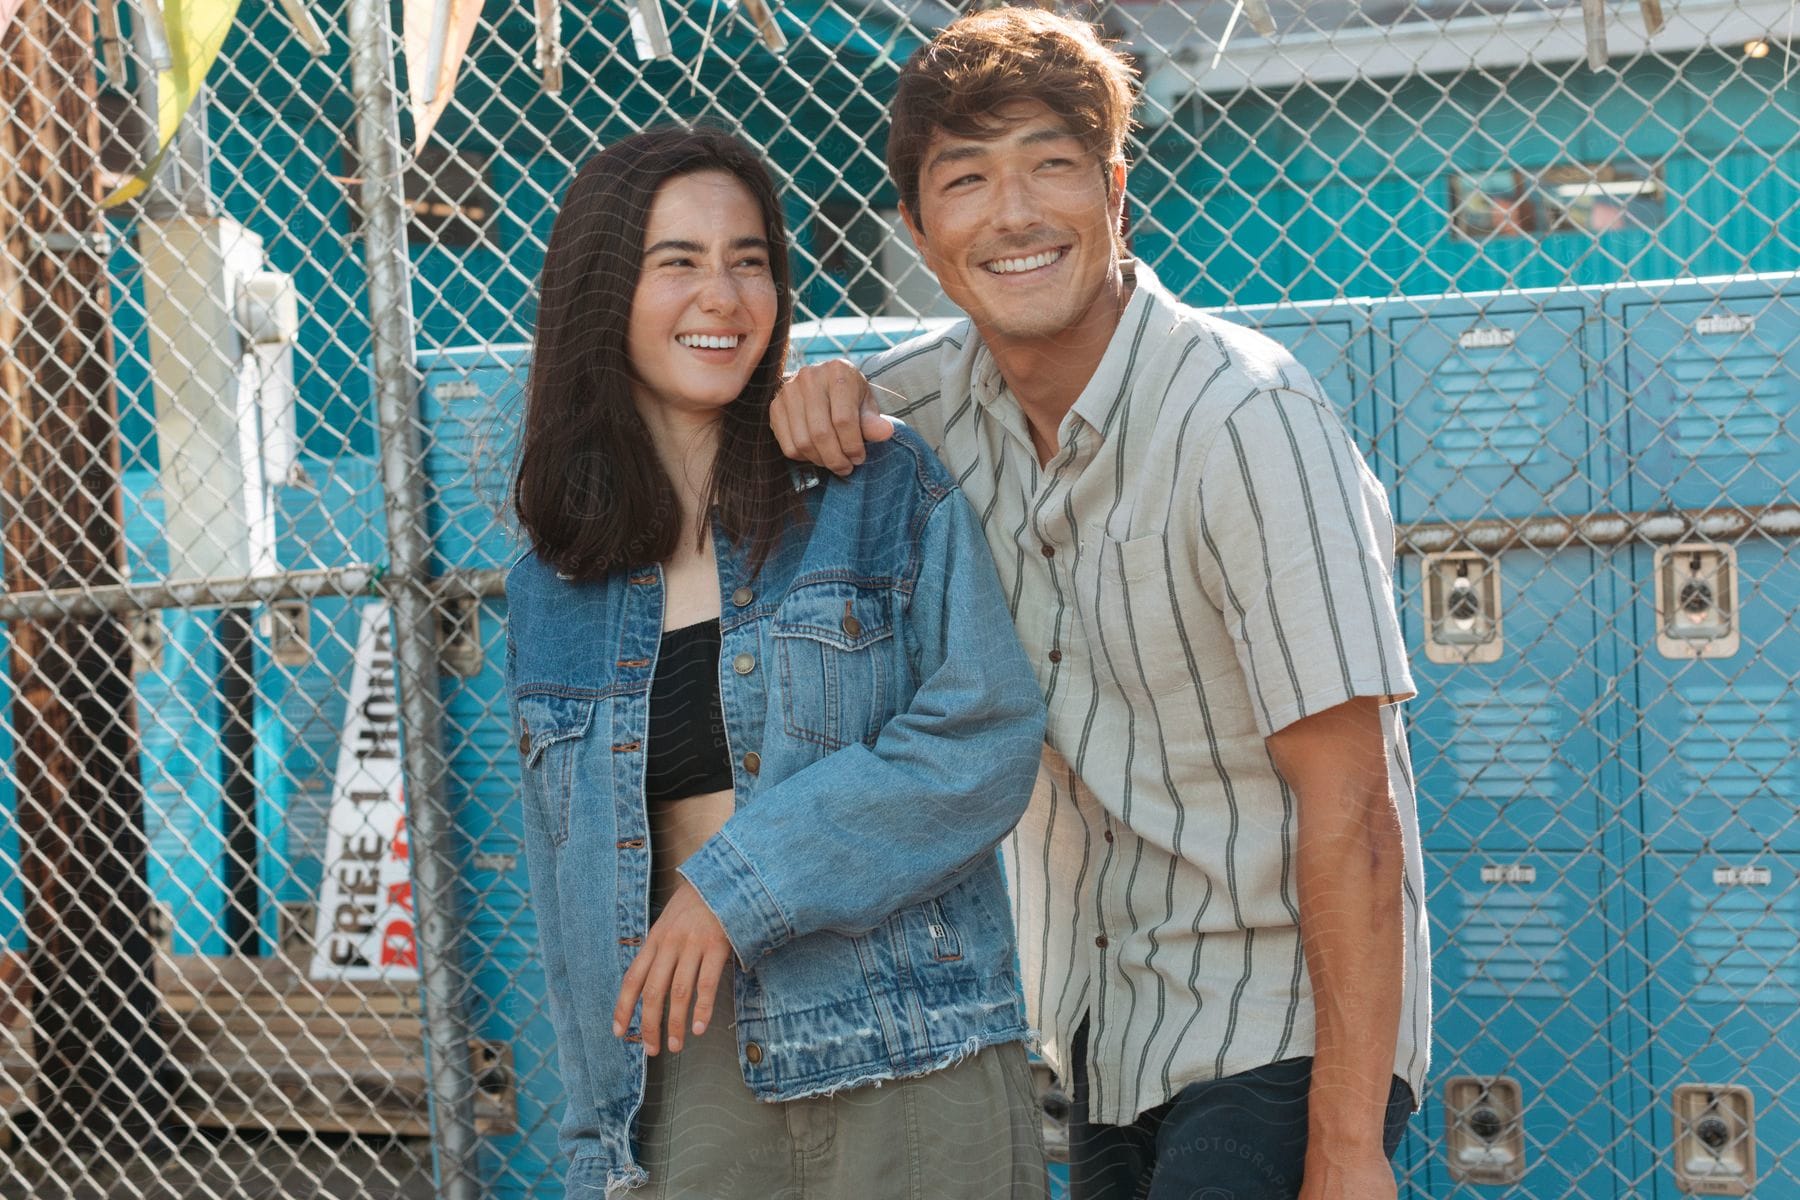 Happy friends standing against chain link fence with blue lockers in the background